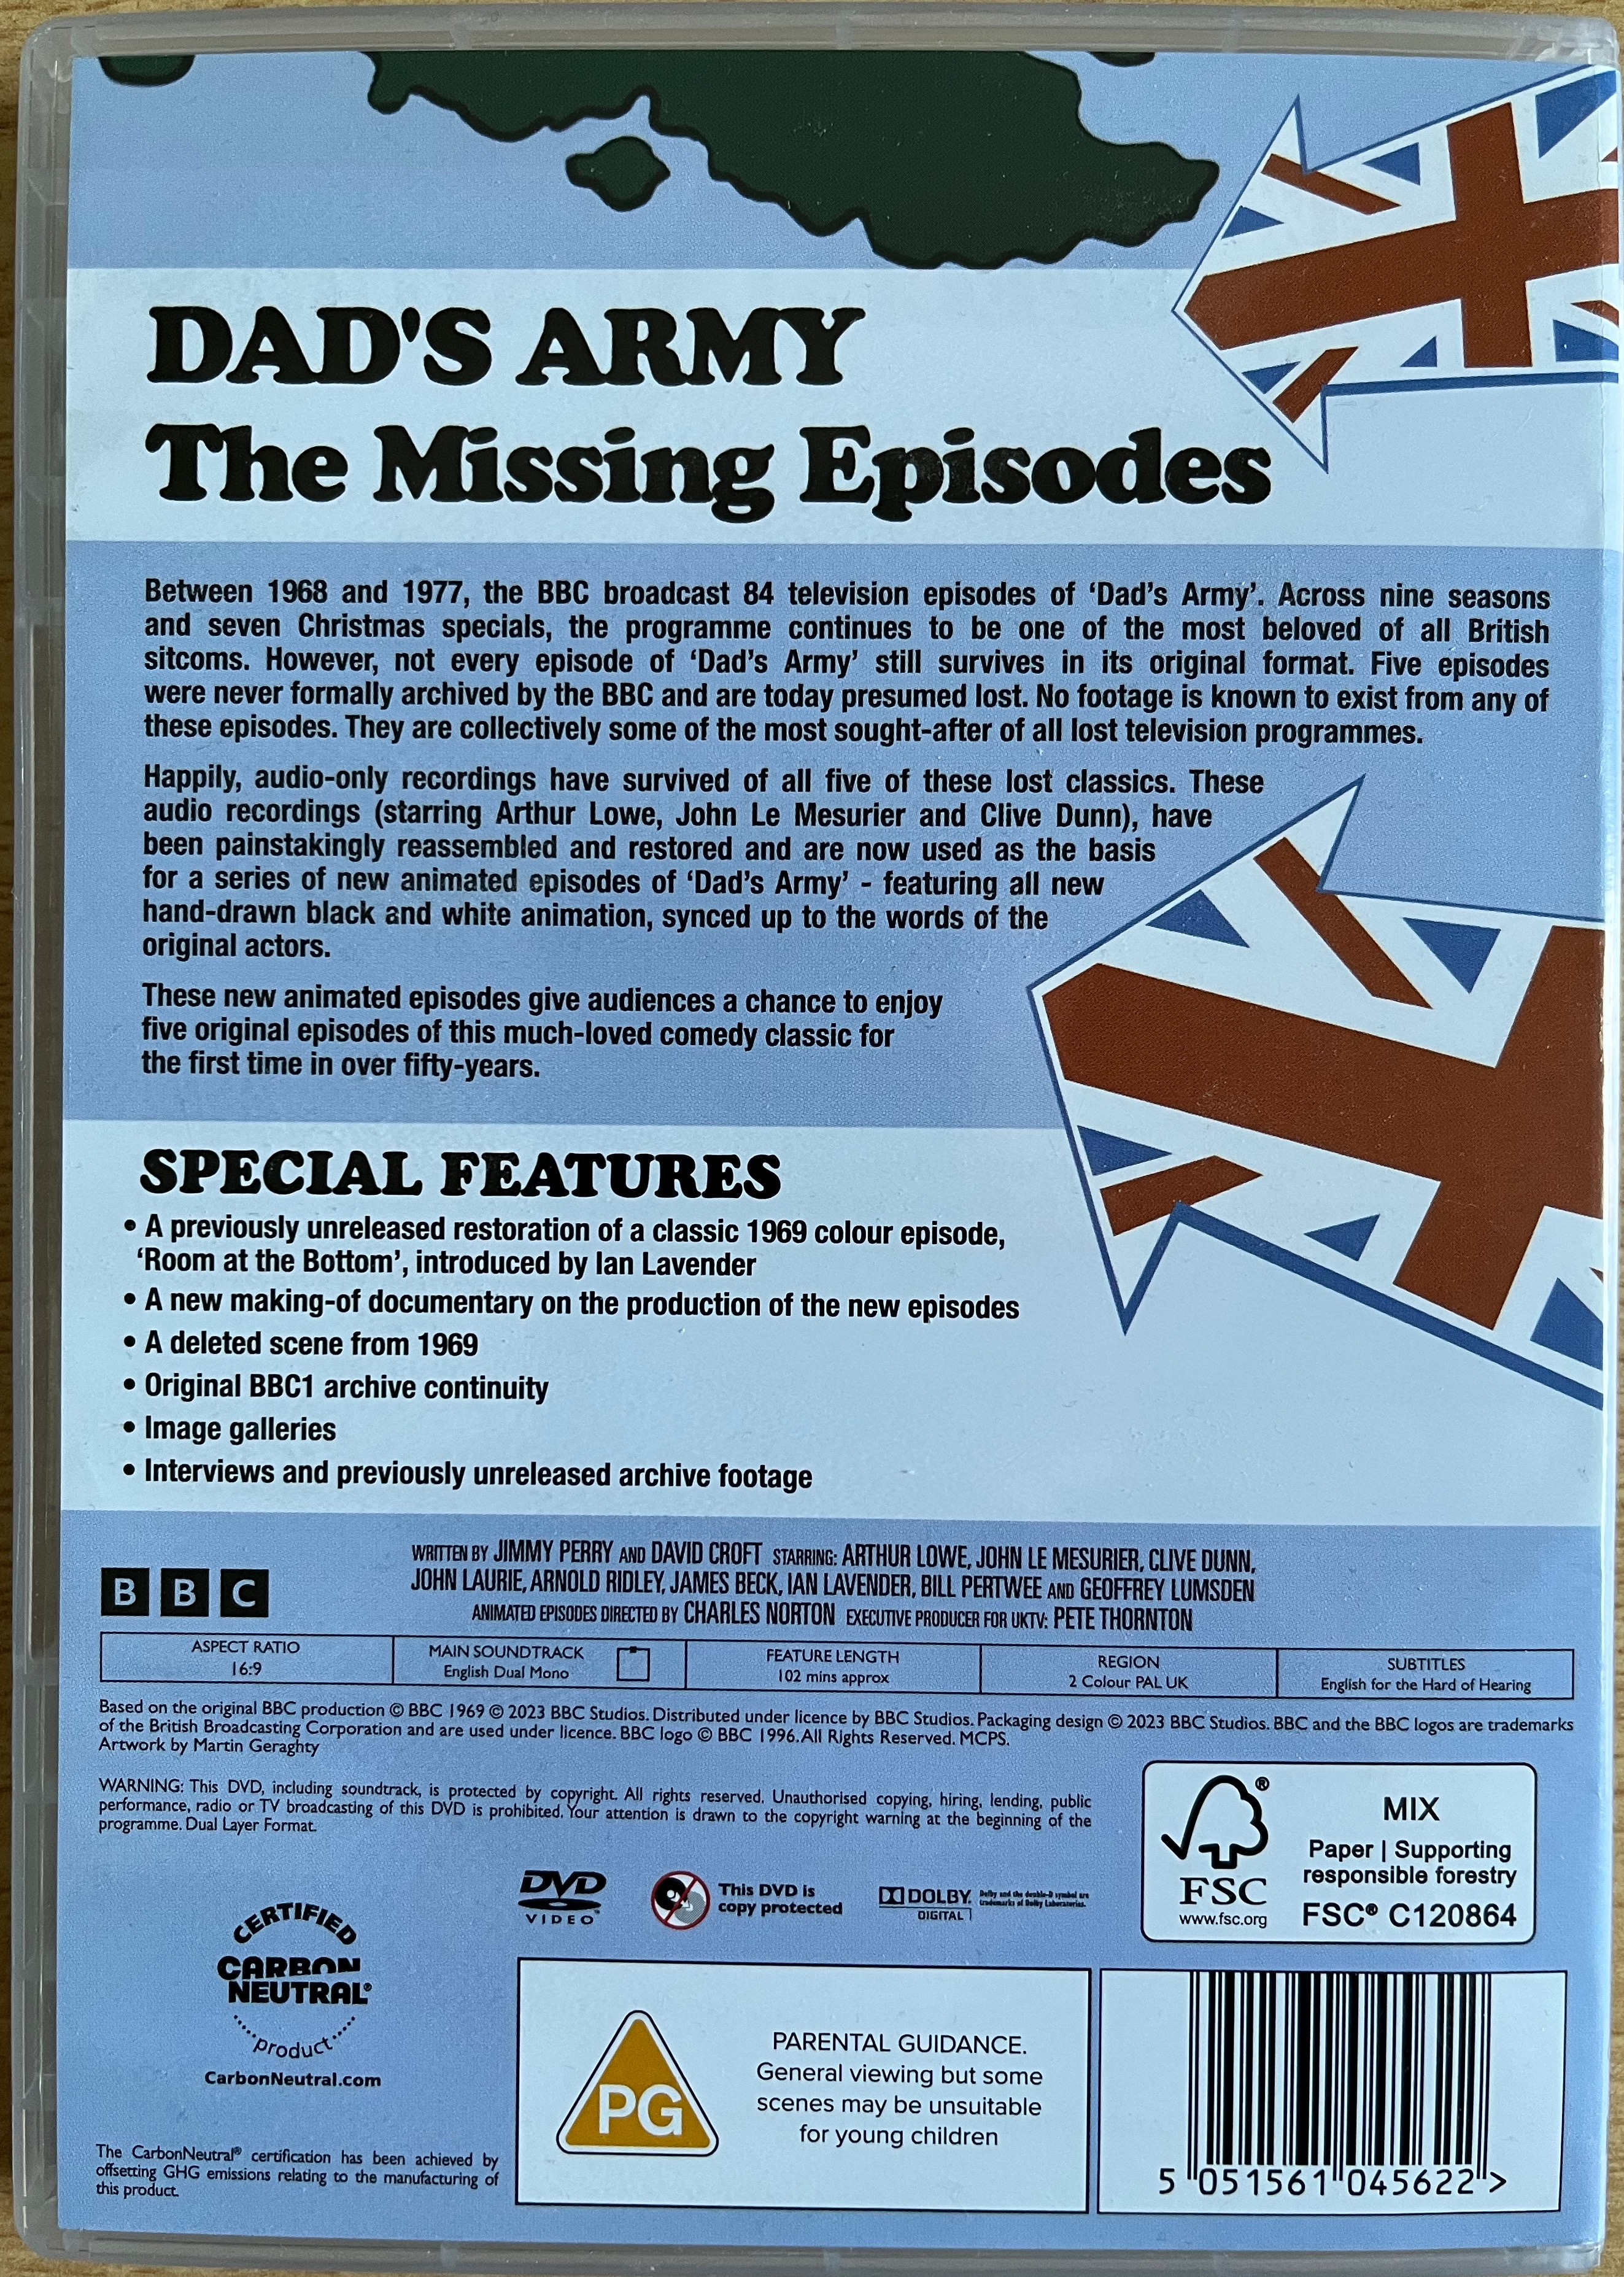 Back cover of the DVD for Dad's Army - The Missing Episodes, giving a brief description of the contents and extra features.